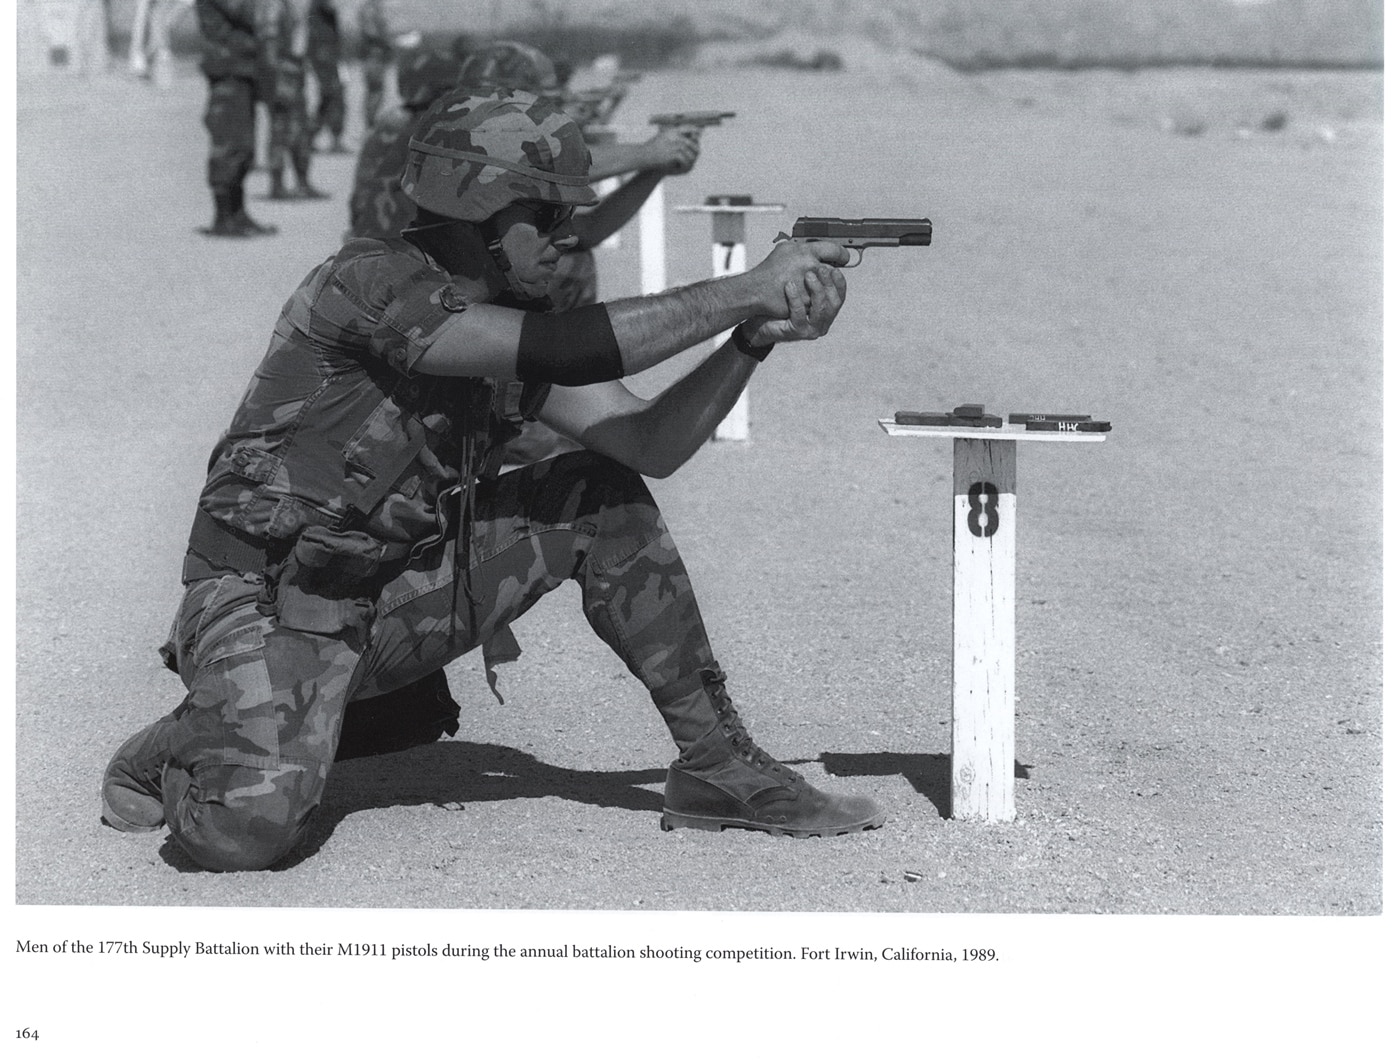 usmc shooting competition with m1911a1